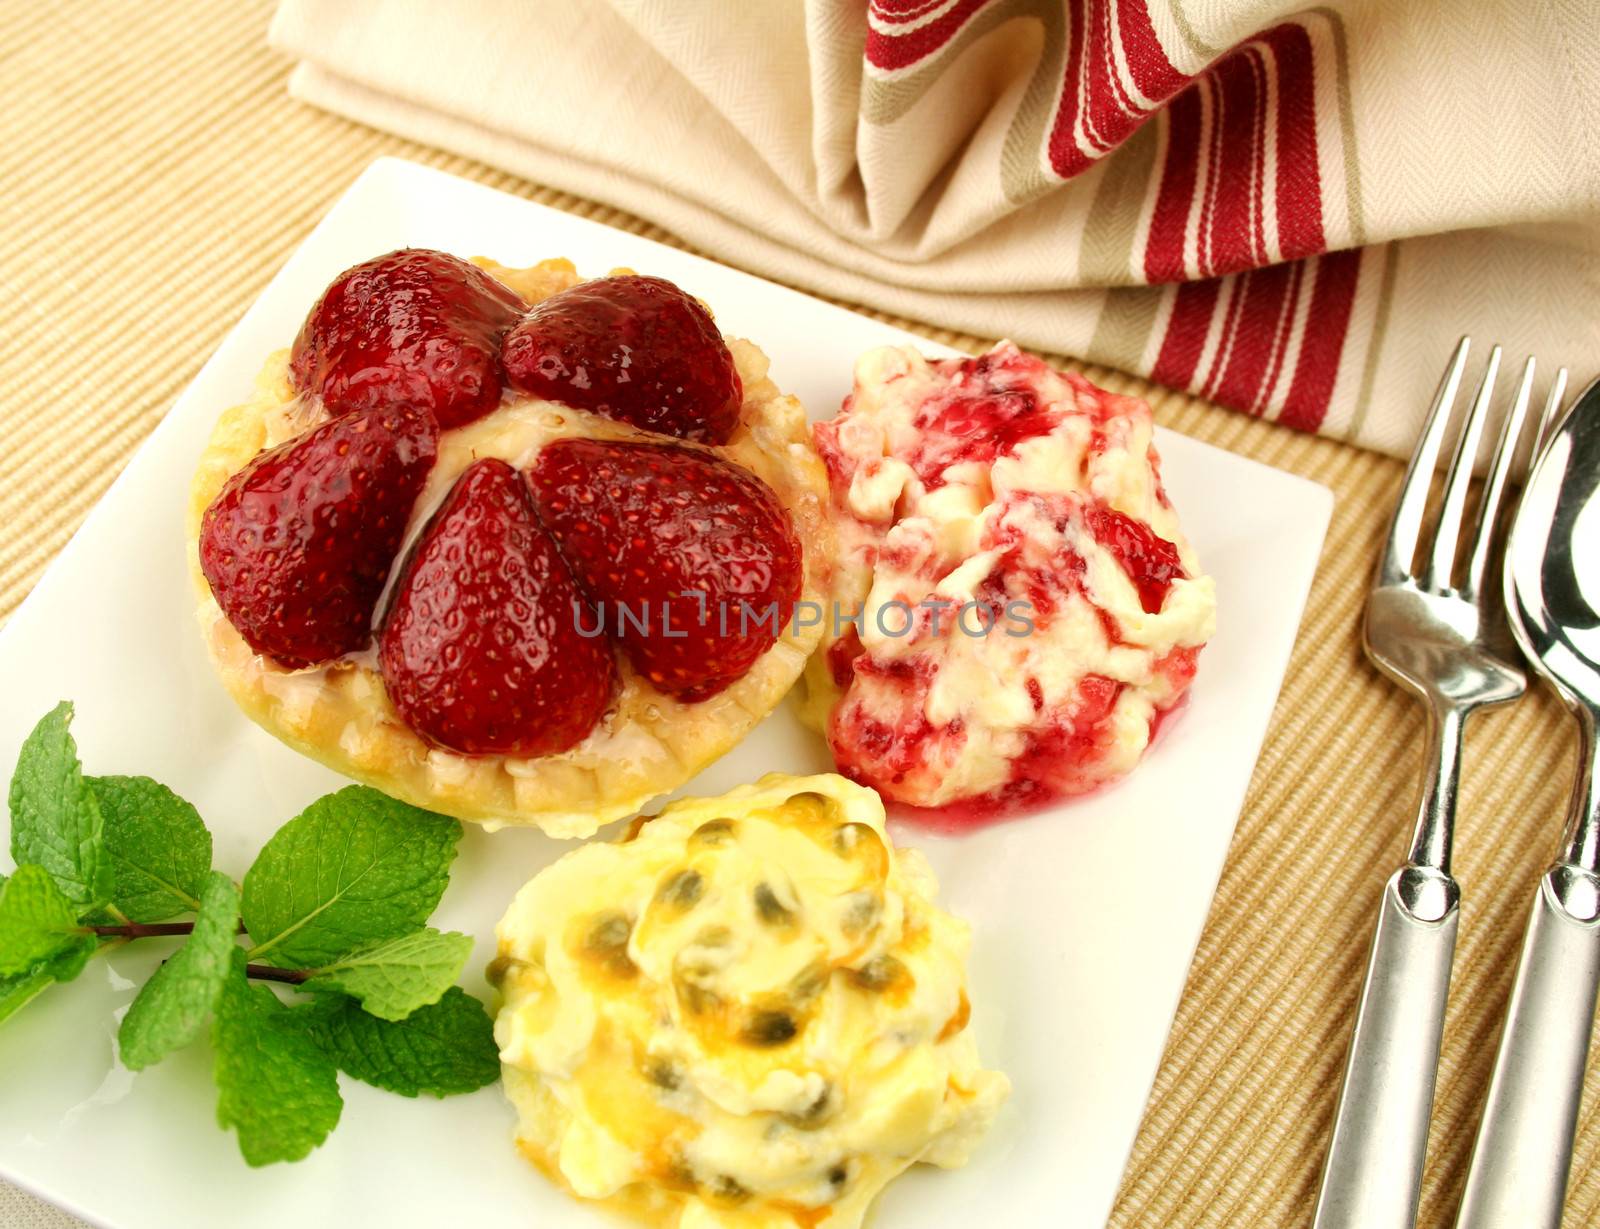 Strawberry custard tart with passionfruit cream and cranberry cream with a mint garnish.